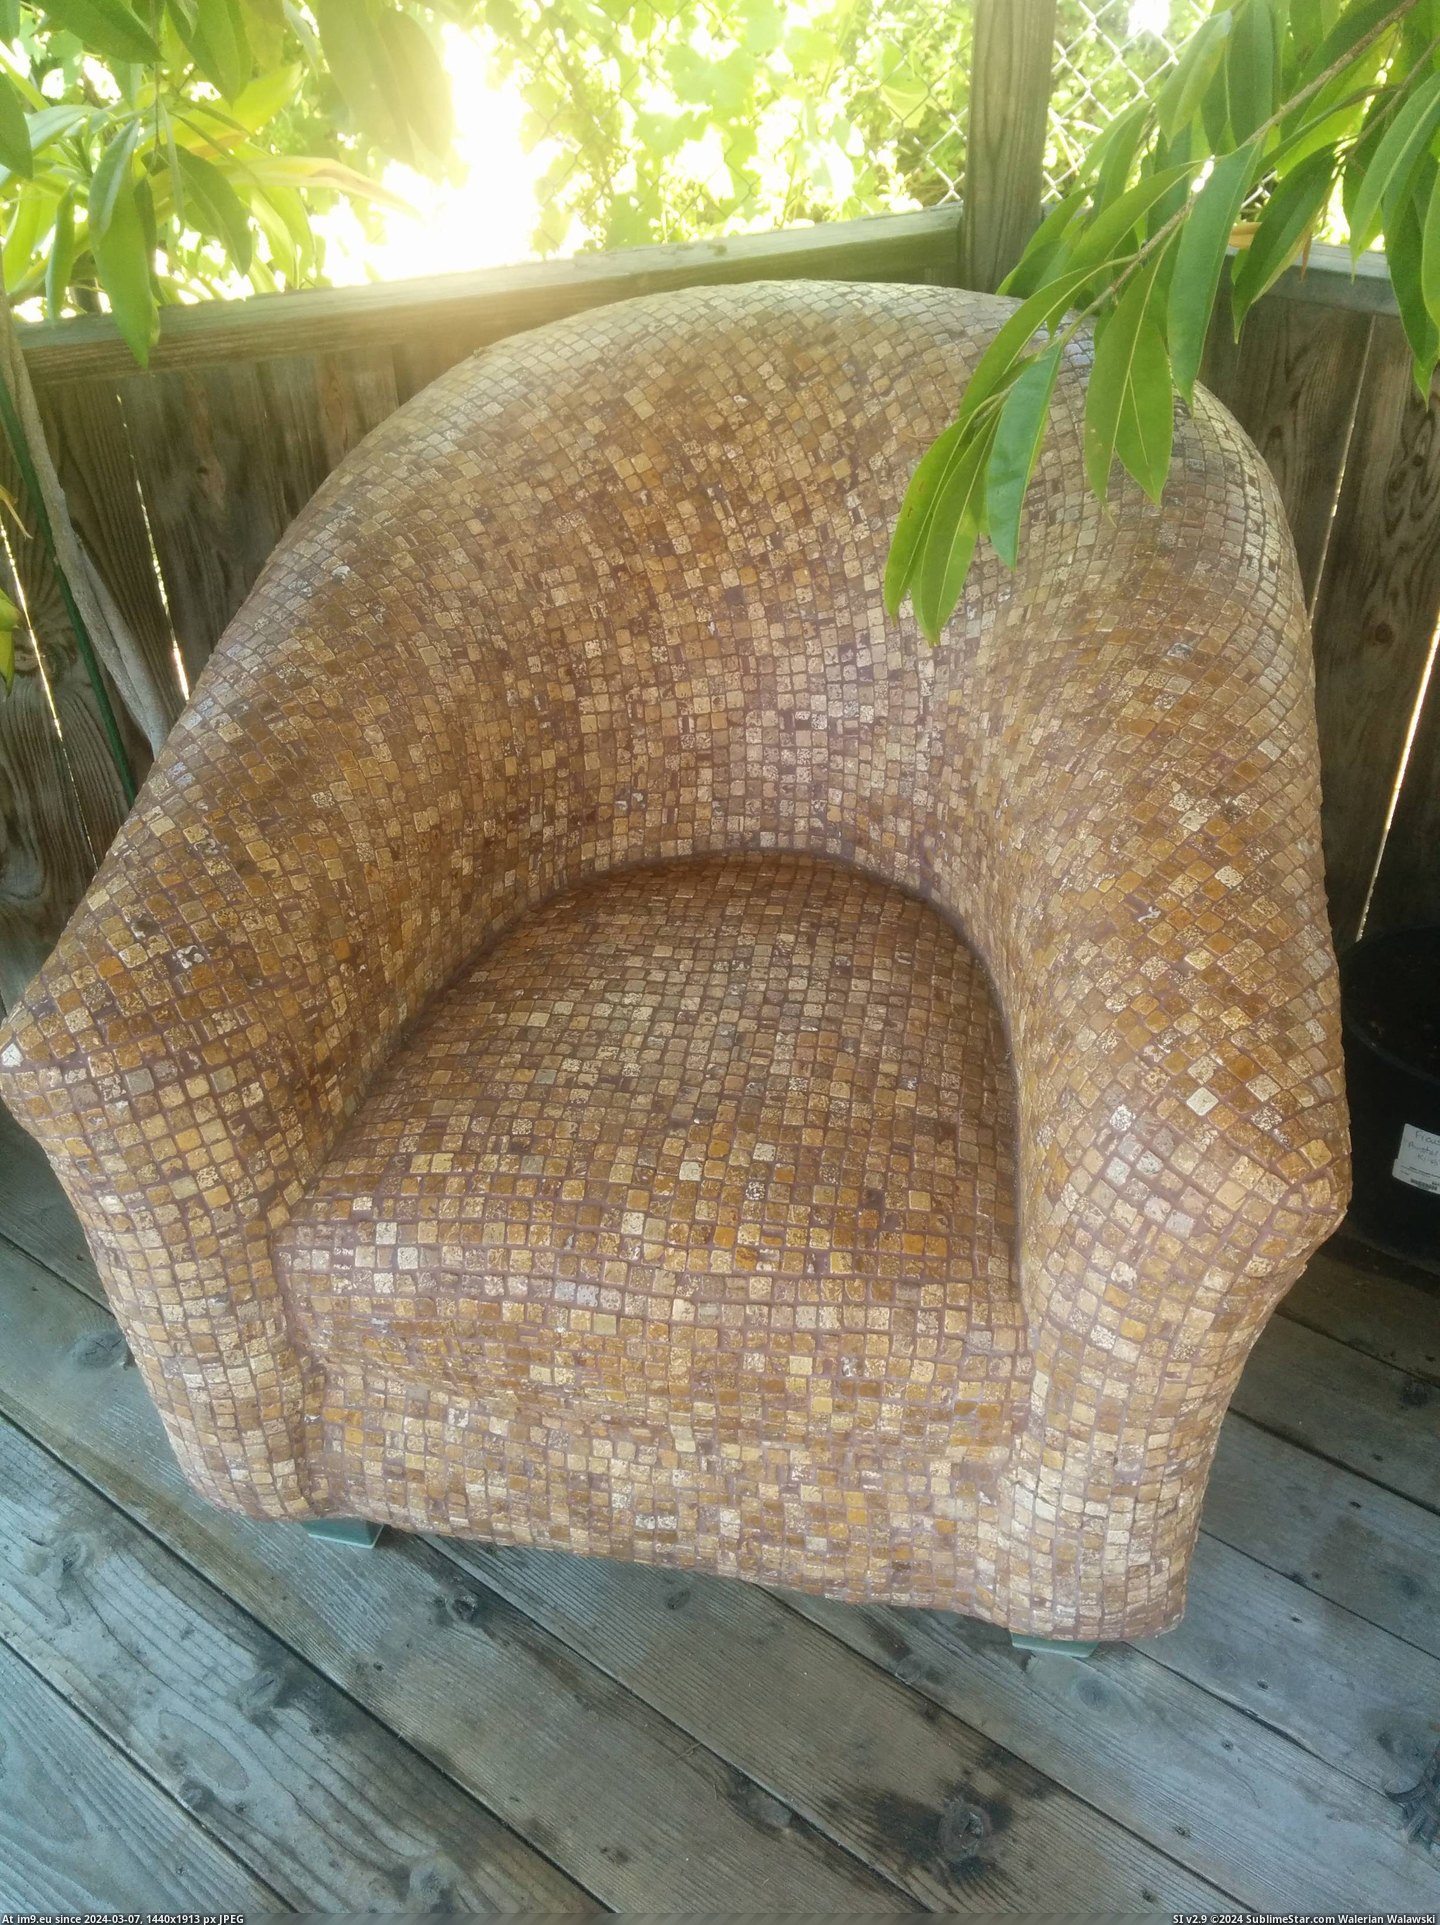 #Tiny #Stone #Tiles #Chair [Mildlyinteresting] This chair is made out of tiny stone tiles. Pic. (Изображение из альбом My r/MILDLYINTERESTING favs))